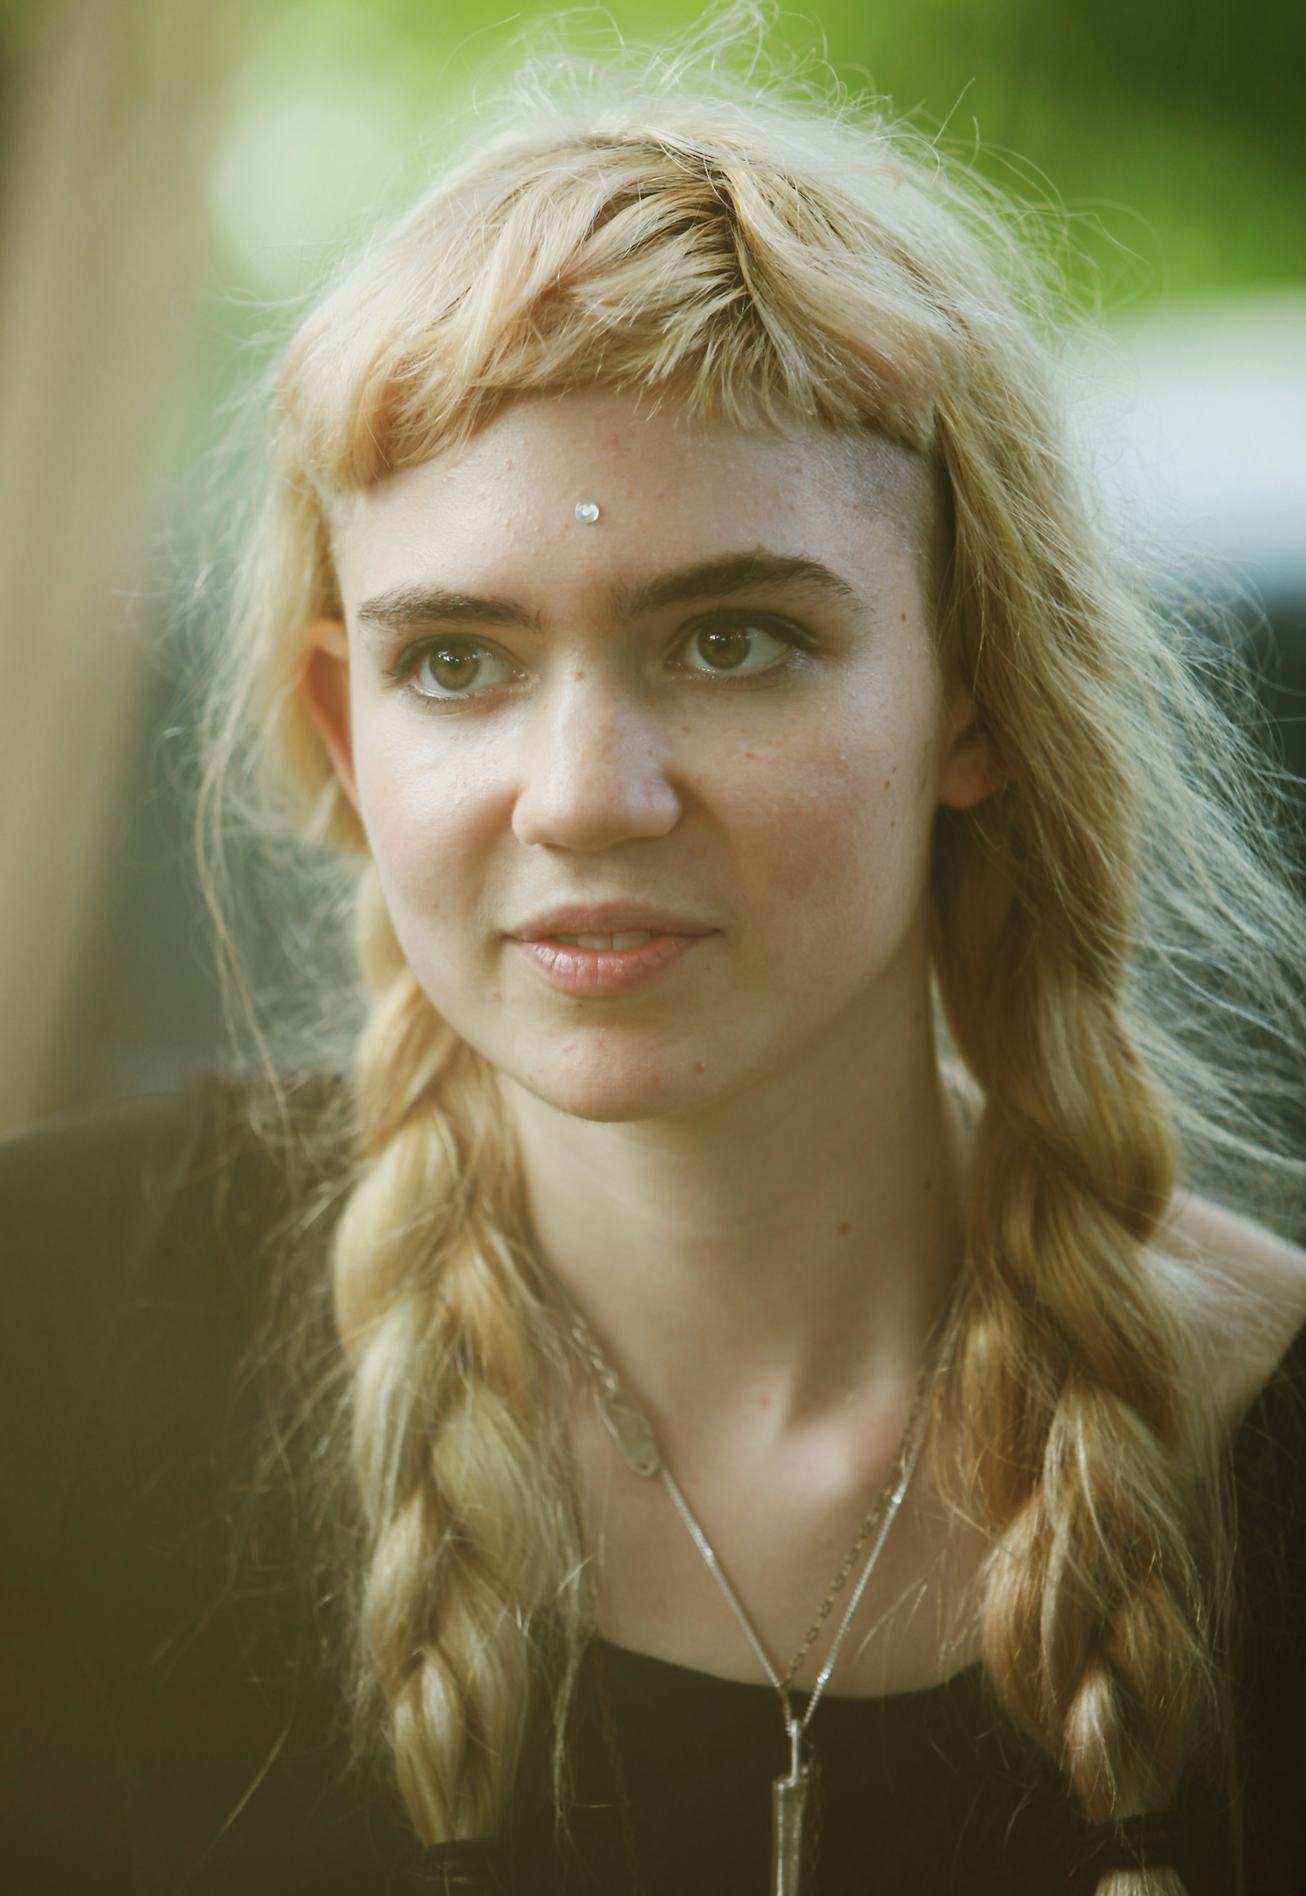 Grimes Beauty Evolution features blonde pigtails with baby bangs